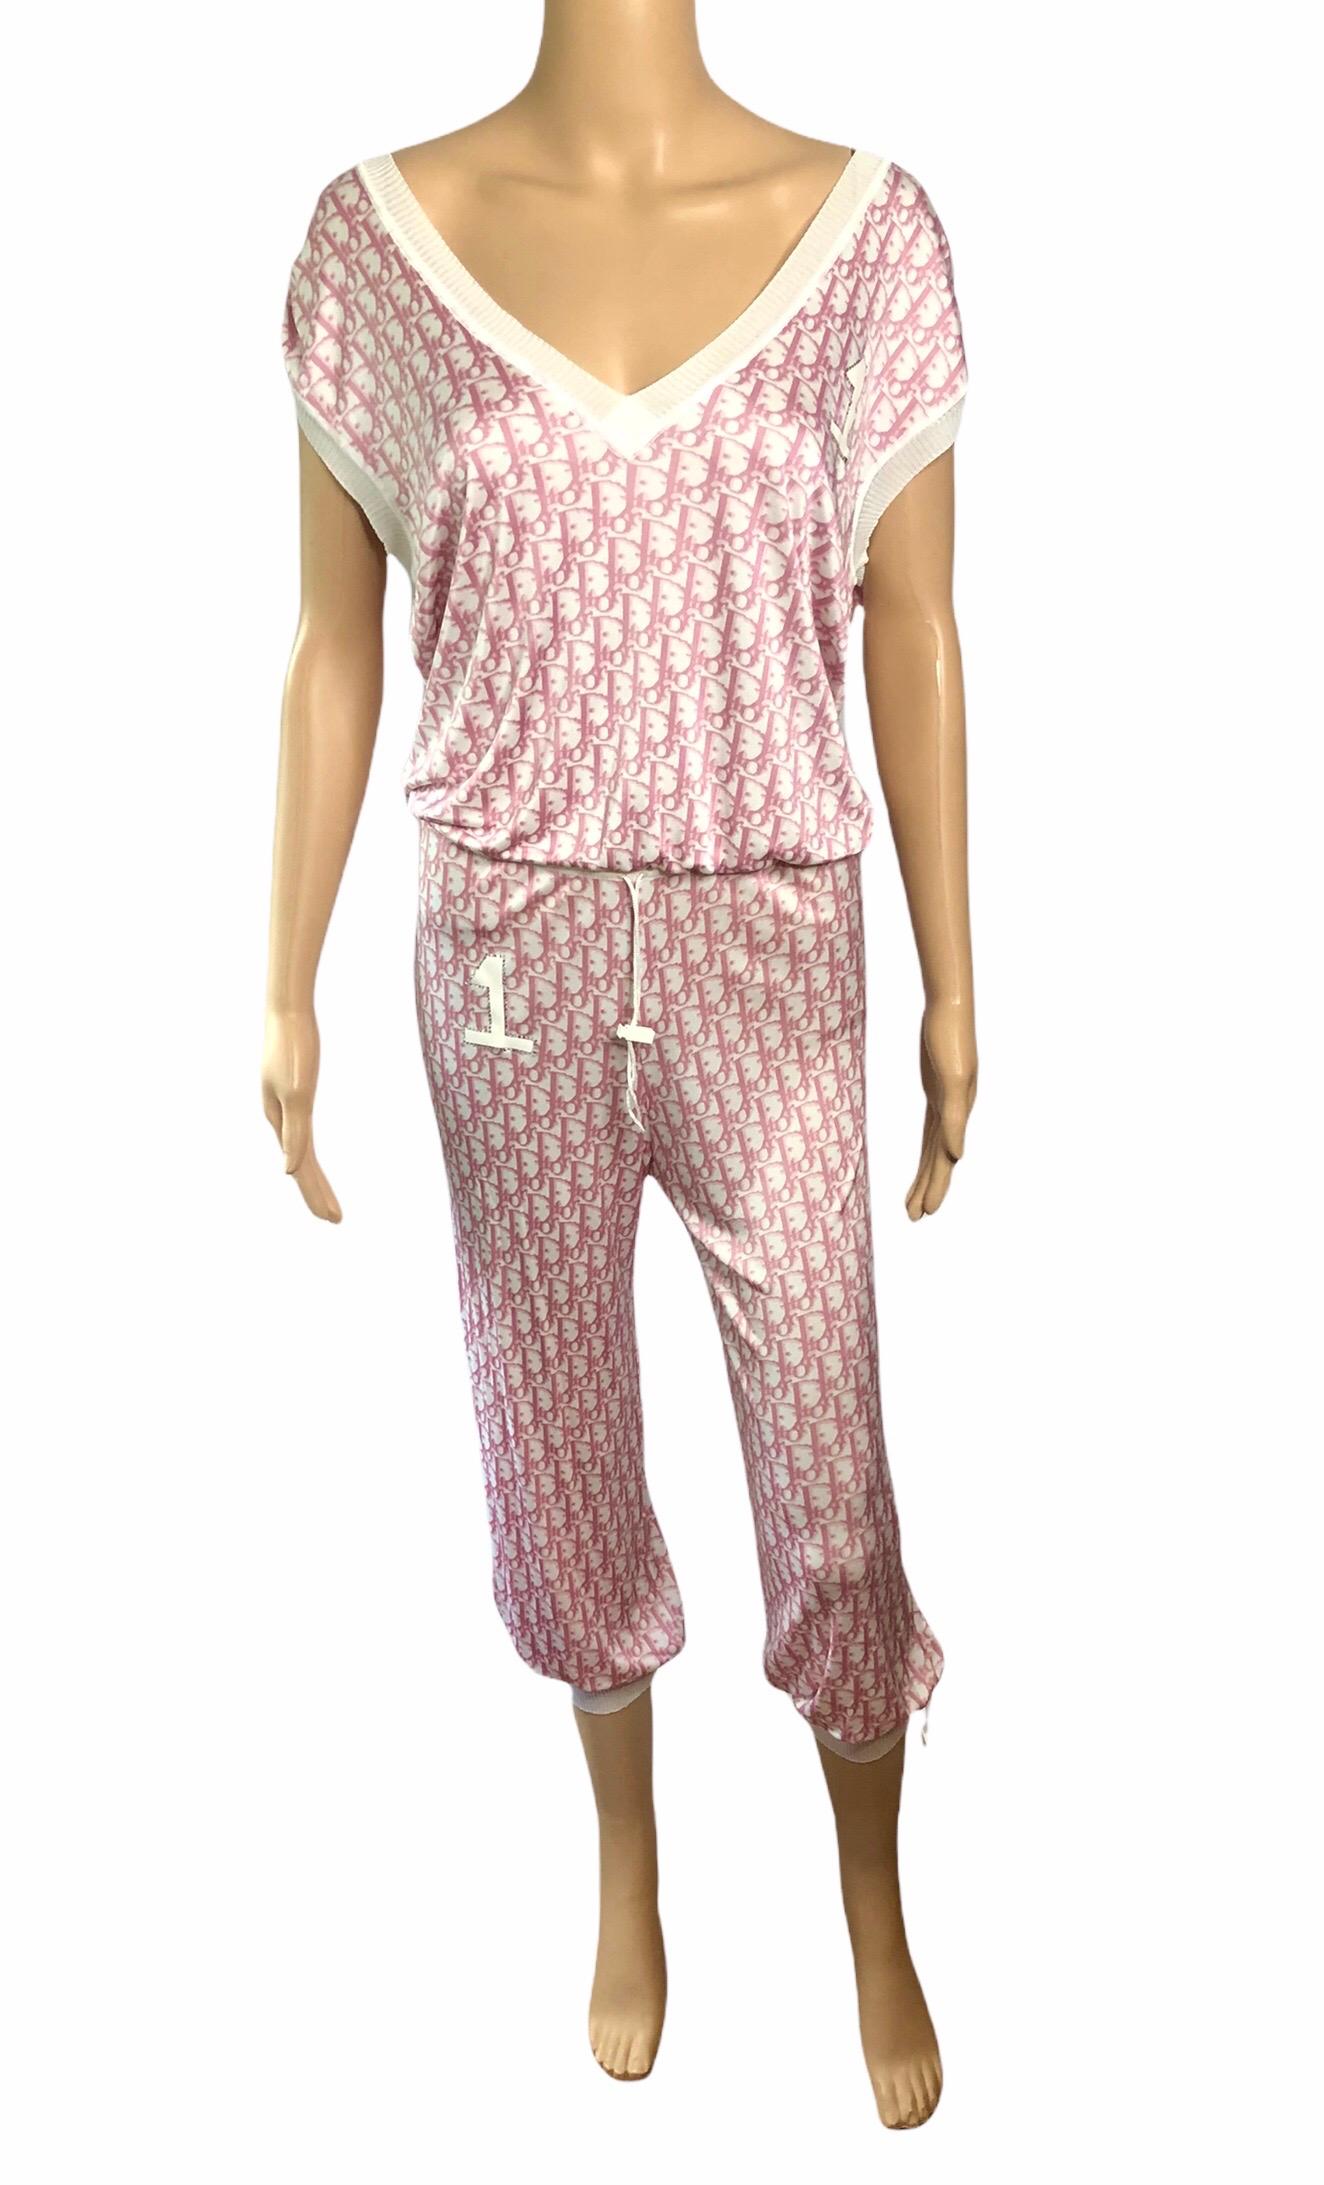 Christian Dior By John Galliano S/S 2004 Pink Diorissimo Monogram Logo Pants & Top 2 Piece Set FR38/FR42

Christian Dior by John Galliano 2 Piece Set featuring the iconic Diorissimo print and Swarovski embellished number 1 on the chest and pants.